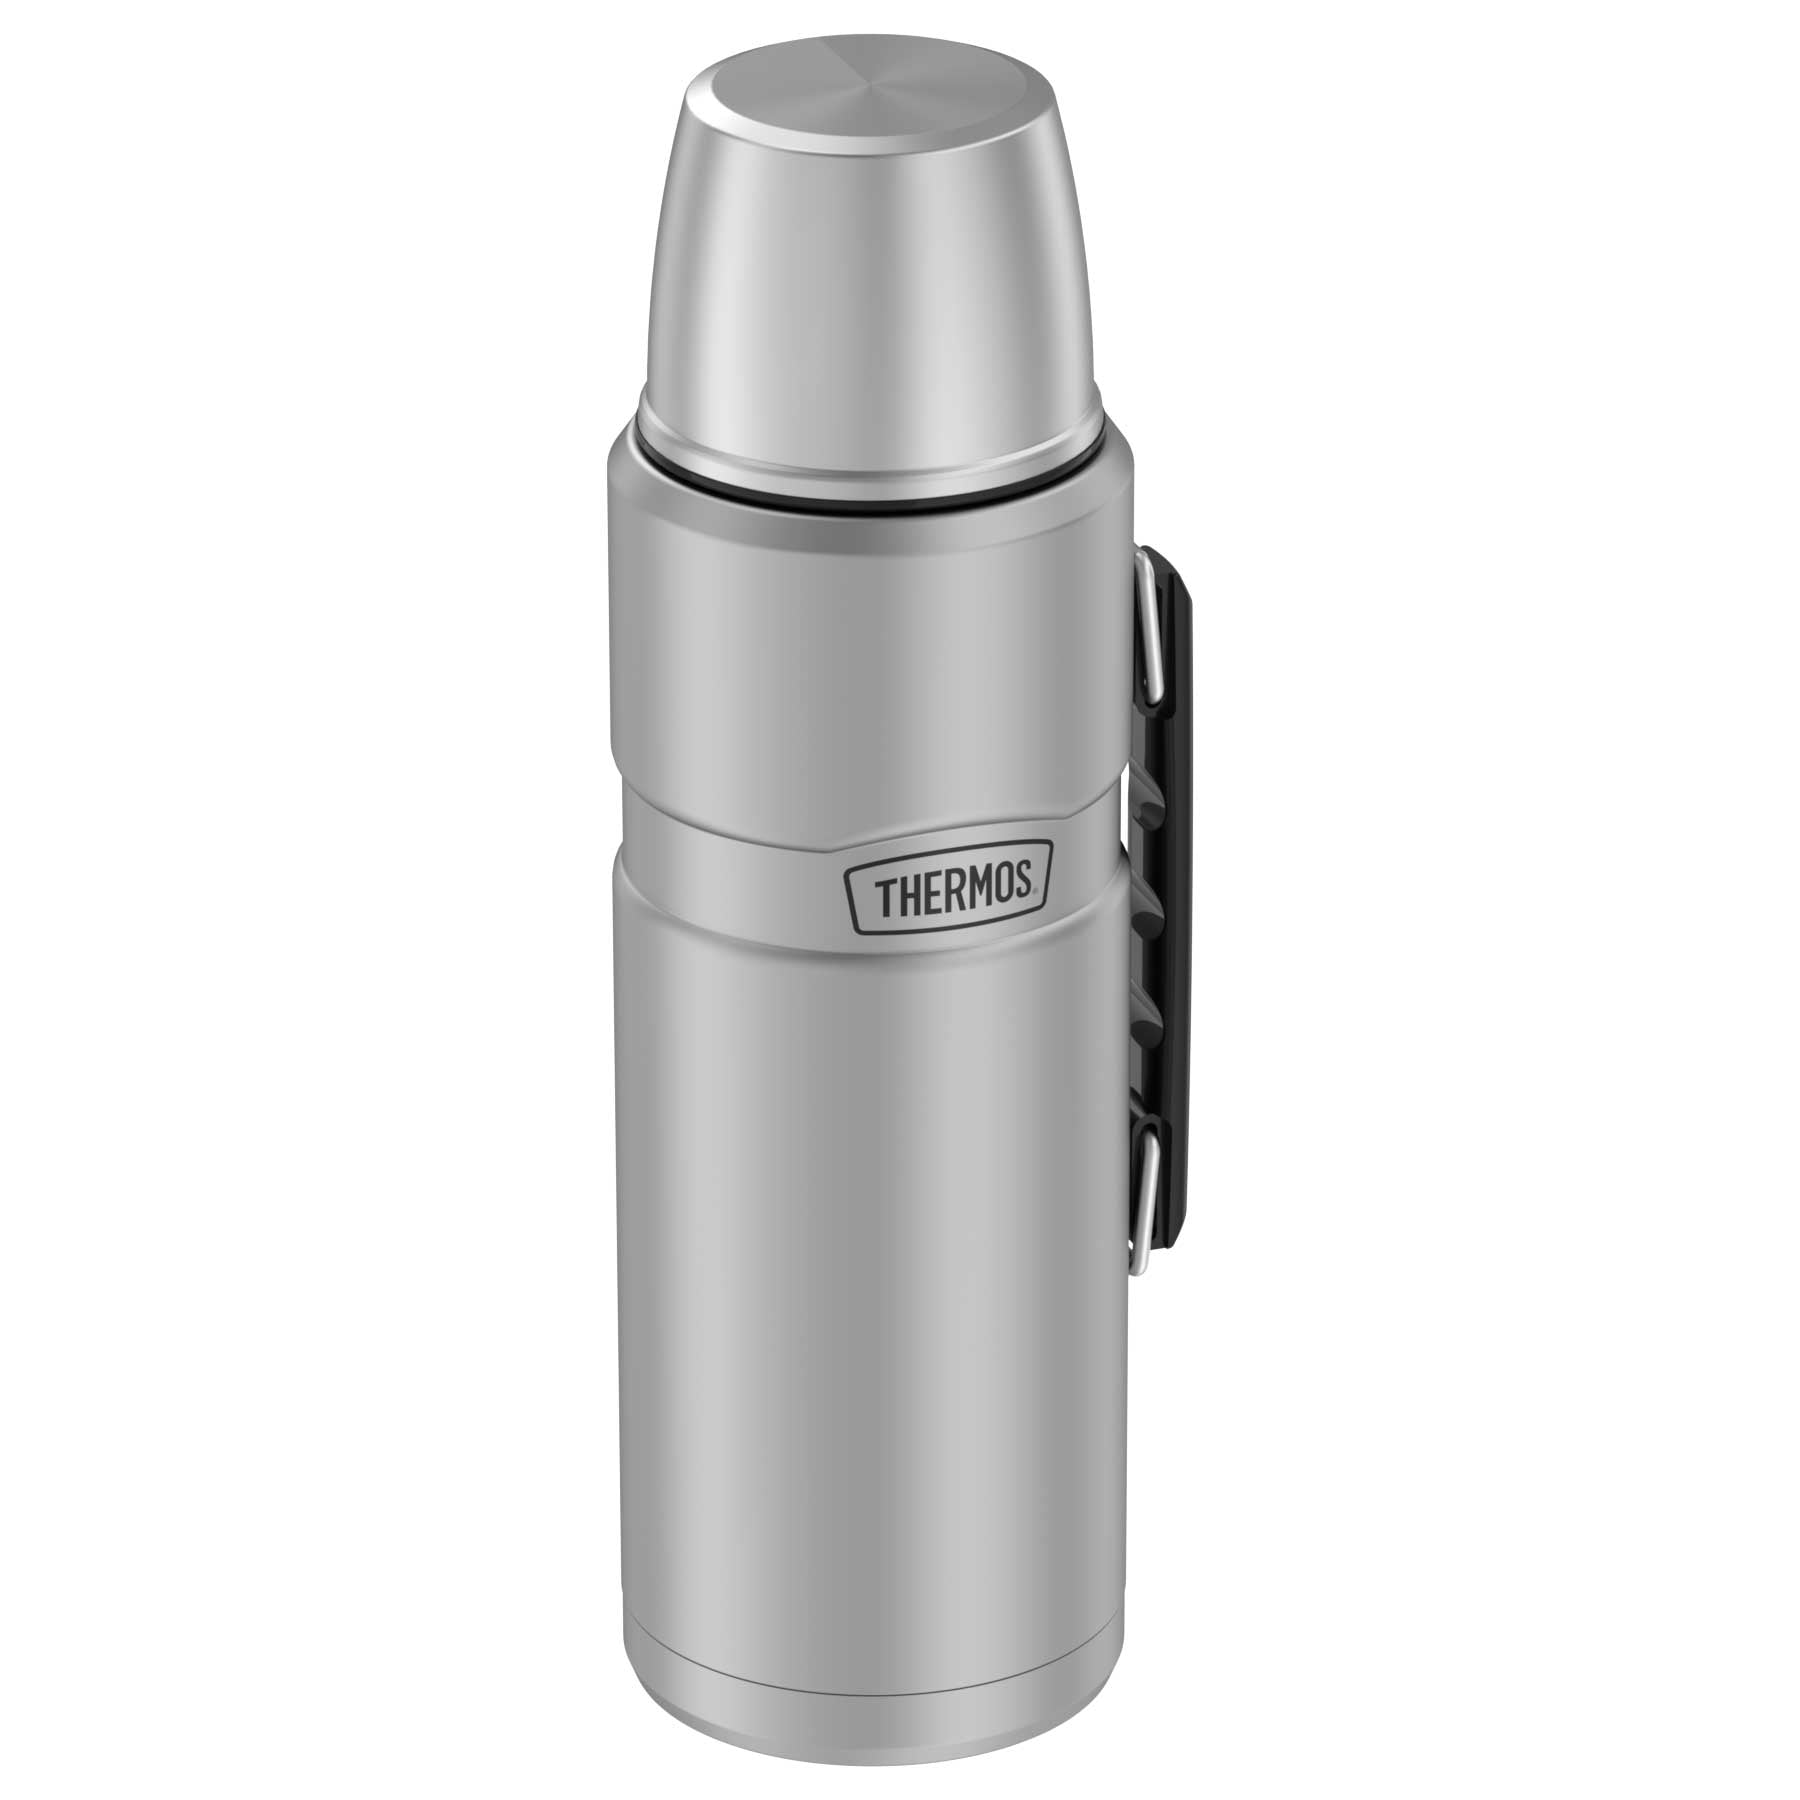 Thermos Stainless King Beverage Bottle 2.0 L